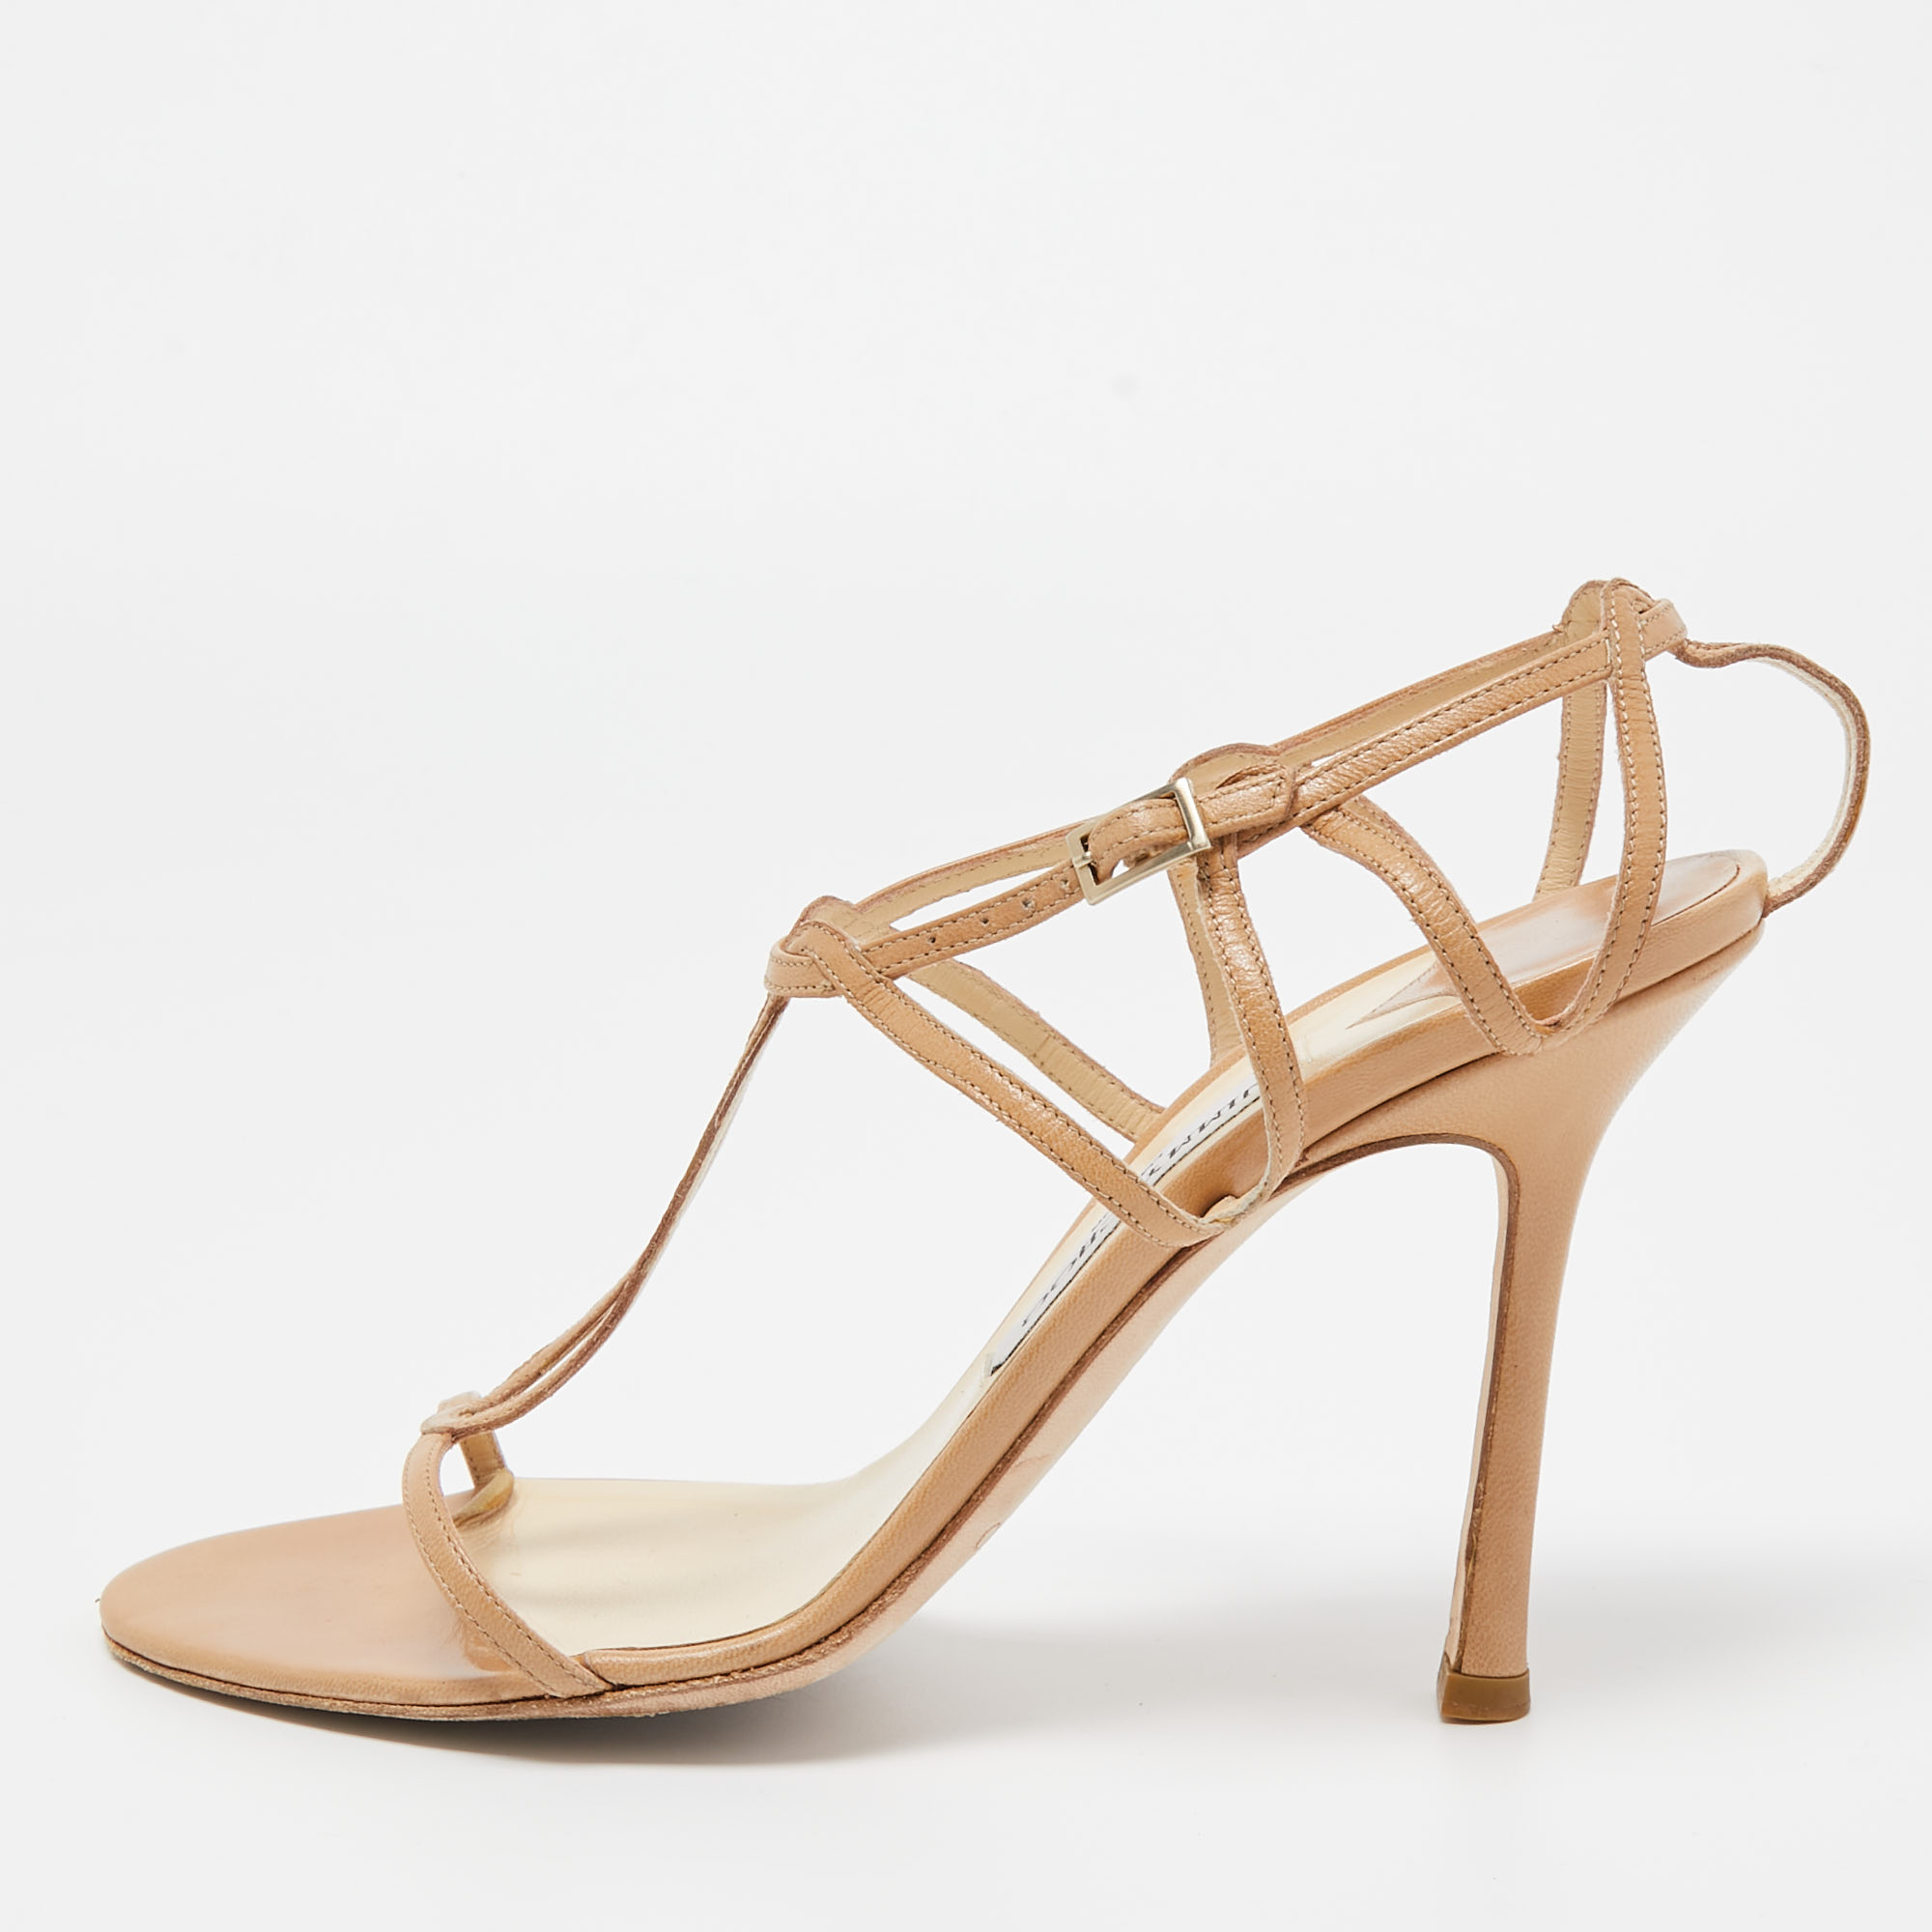 Pre-owned Jimmy Choo Brown Leather Strappy Sandals Size 39